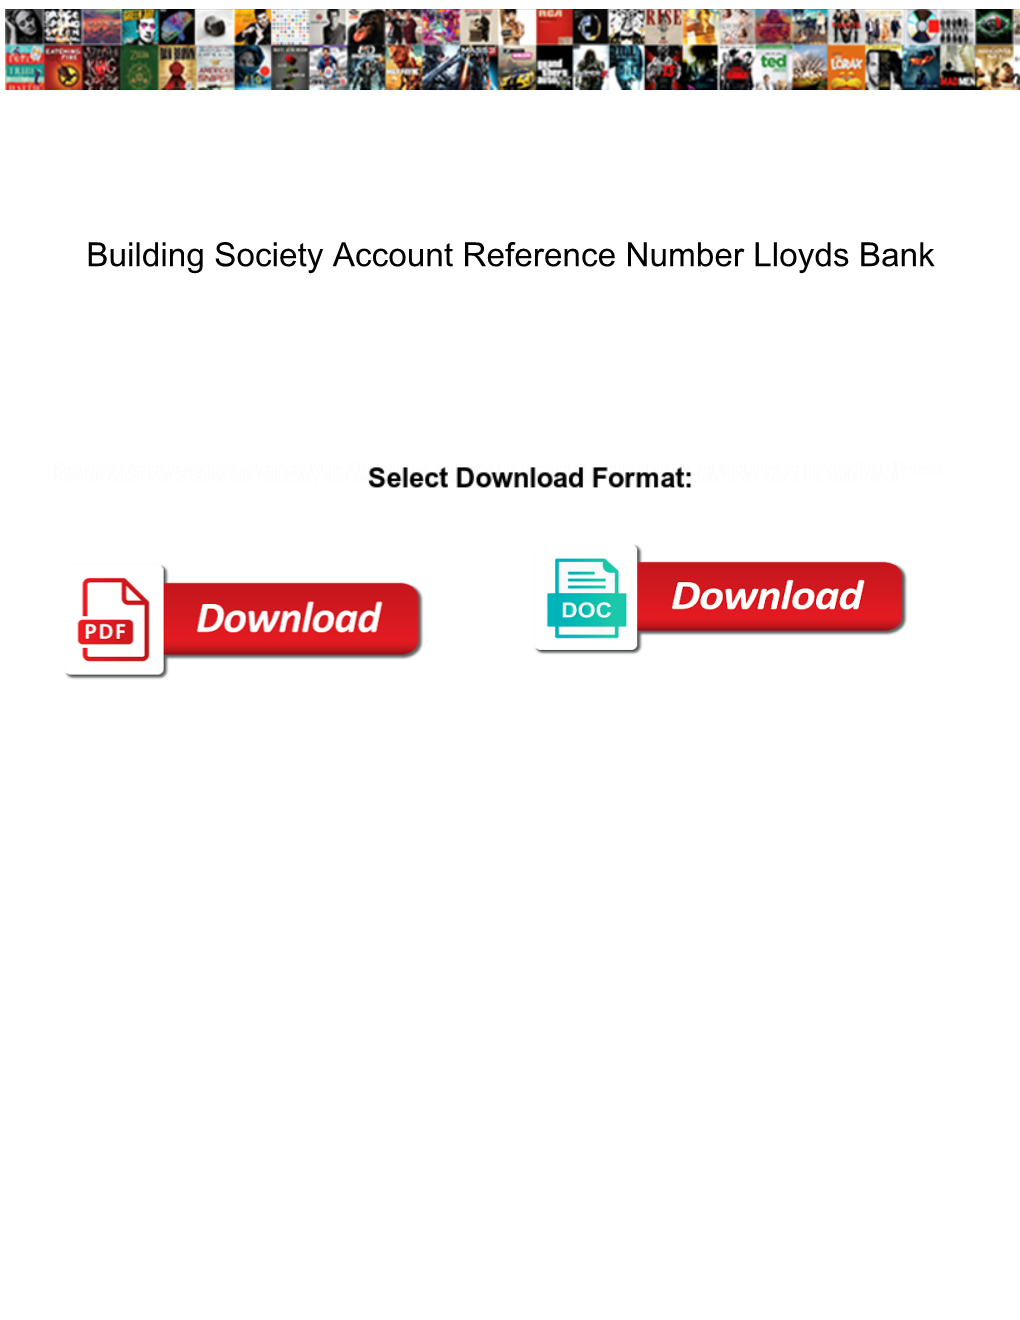 Building Society Account Reference Number Lloyds Bank DocsLib